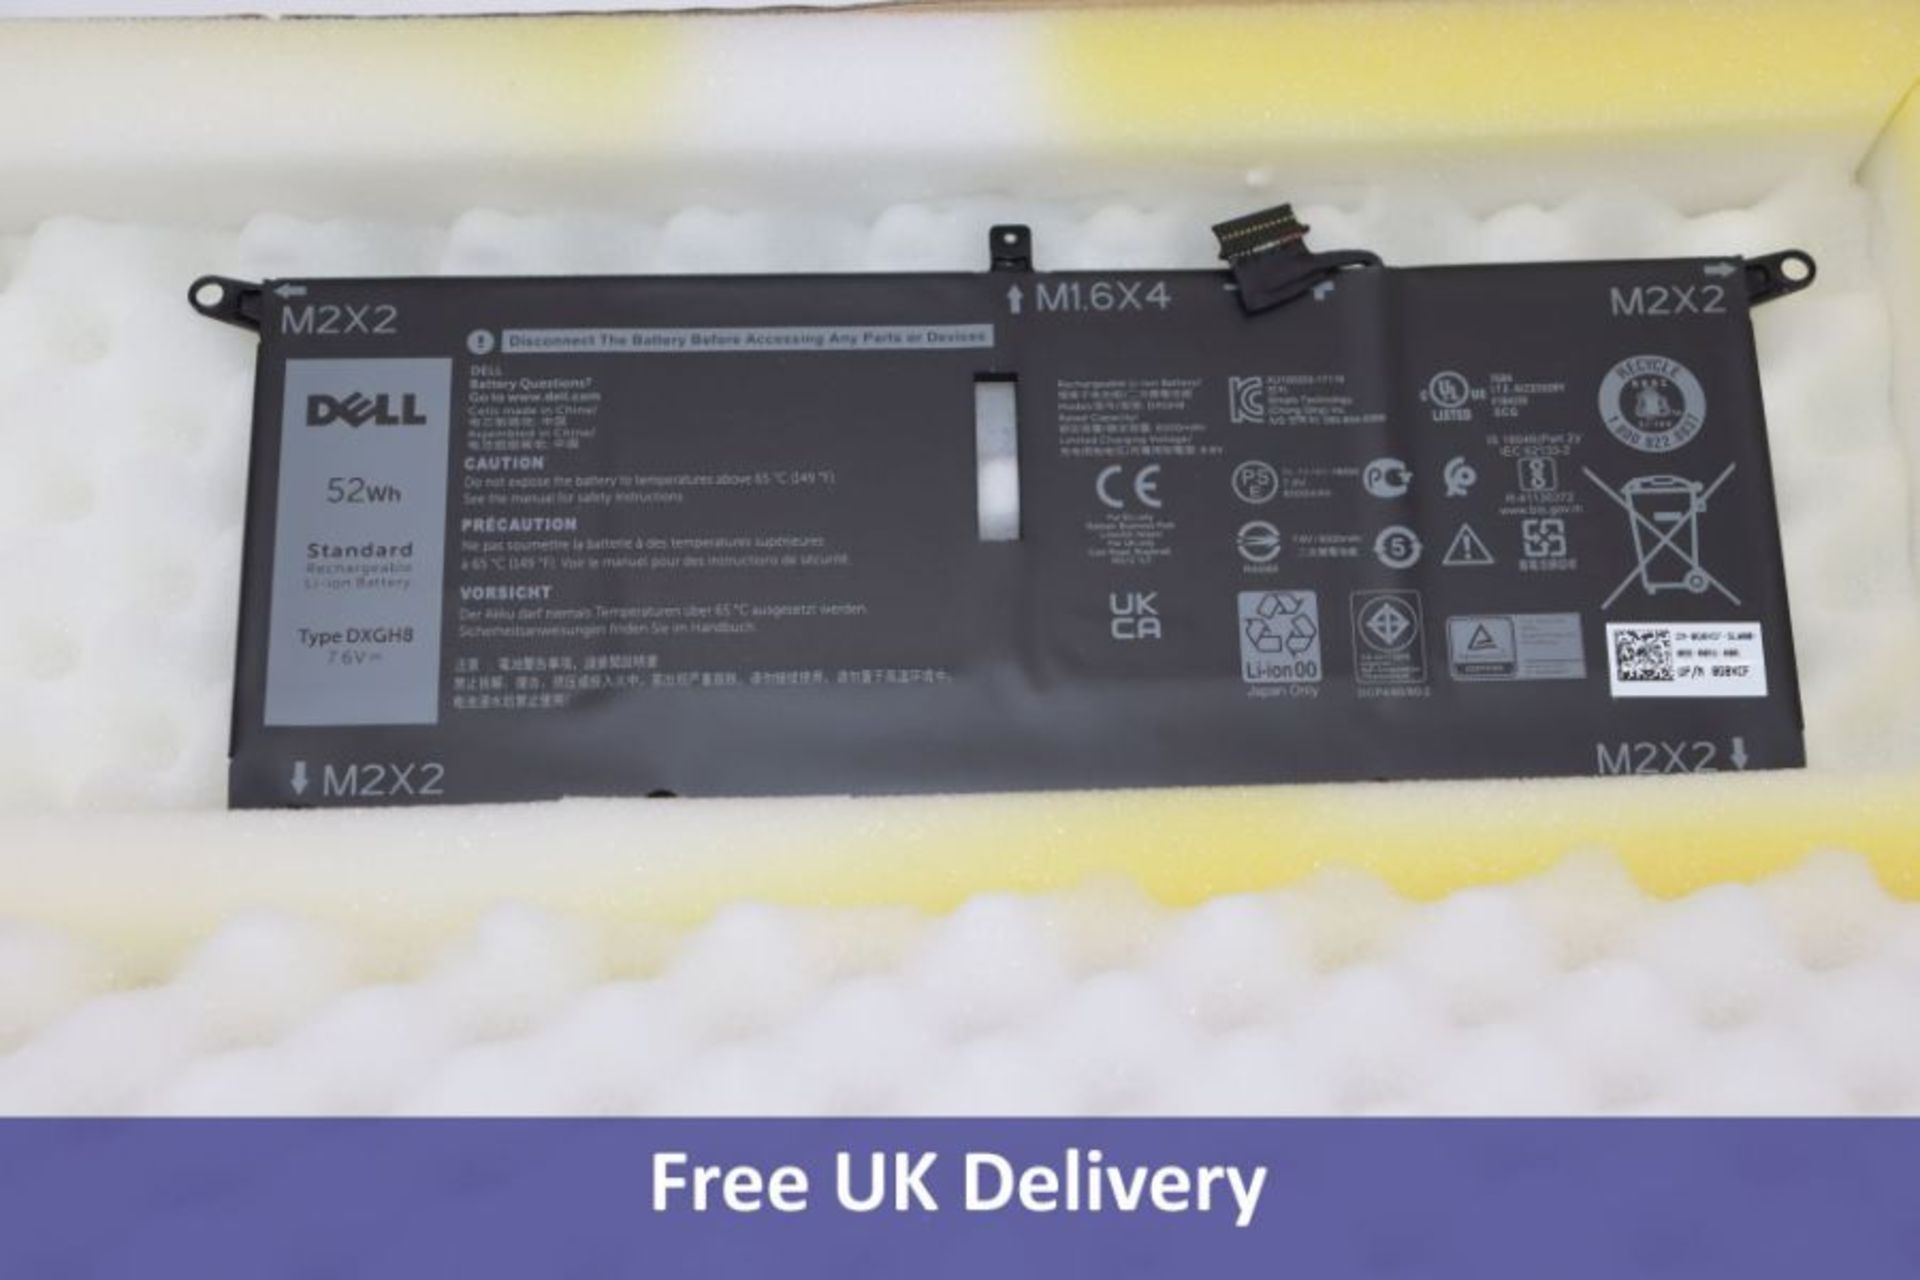 Dell Replacement Laptop Battery, DXGH8